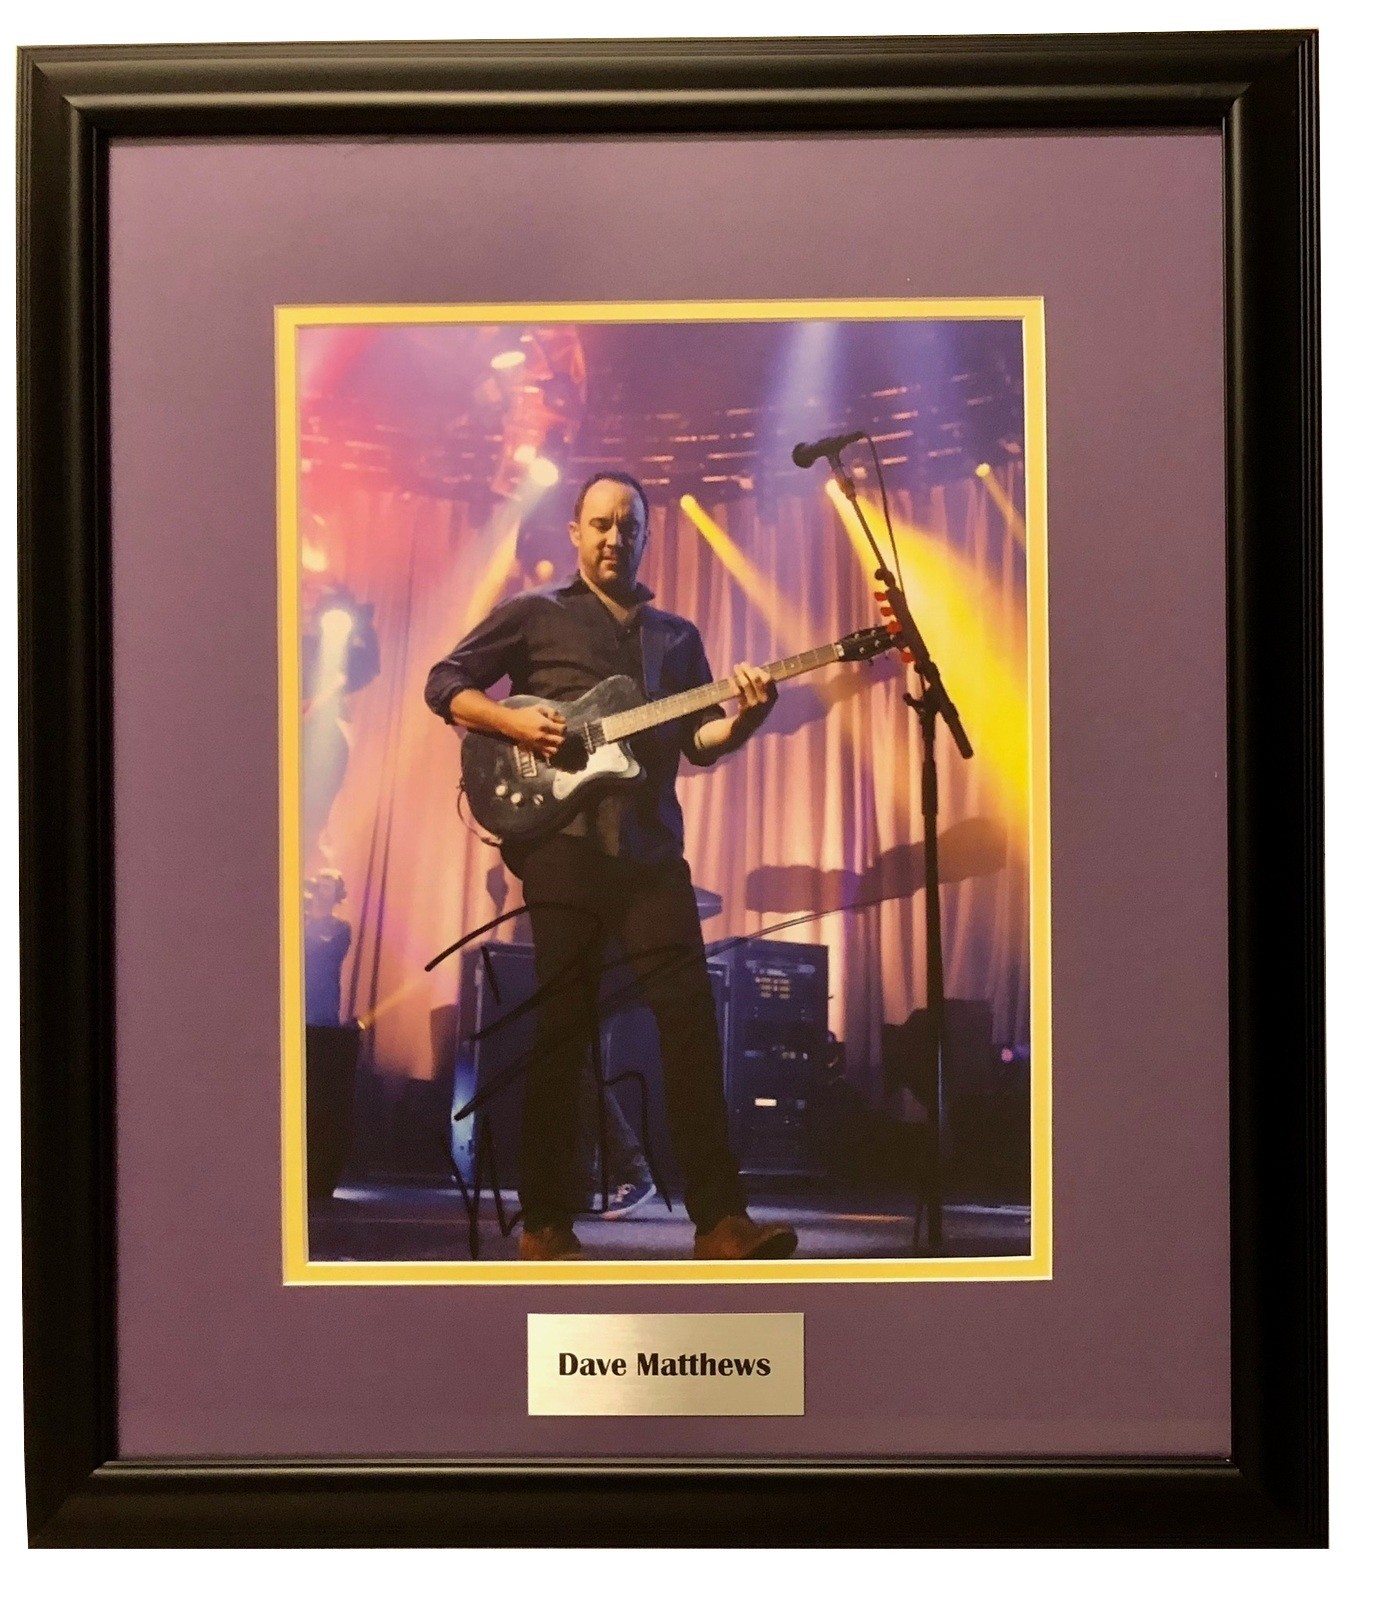 DAVE MATTHEWS FRAMED AUTOGRAPHED Hand SIGNED 11X14 PHOTO DMB w/COA  - $450.00